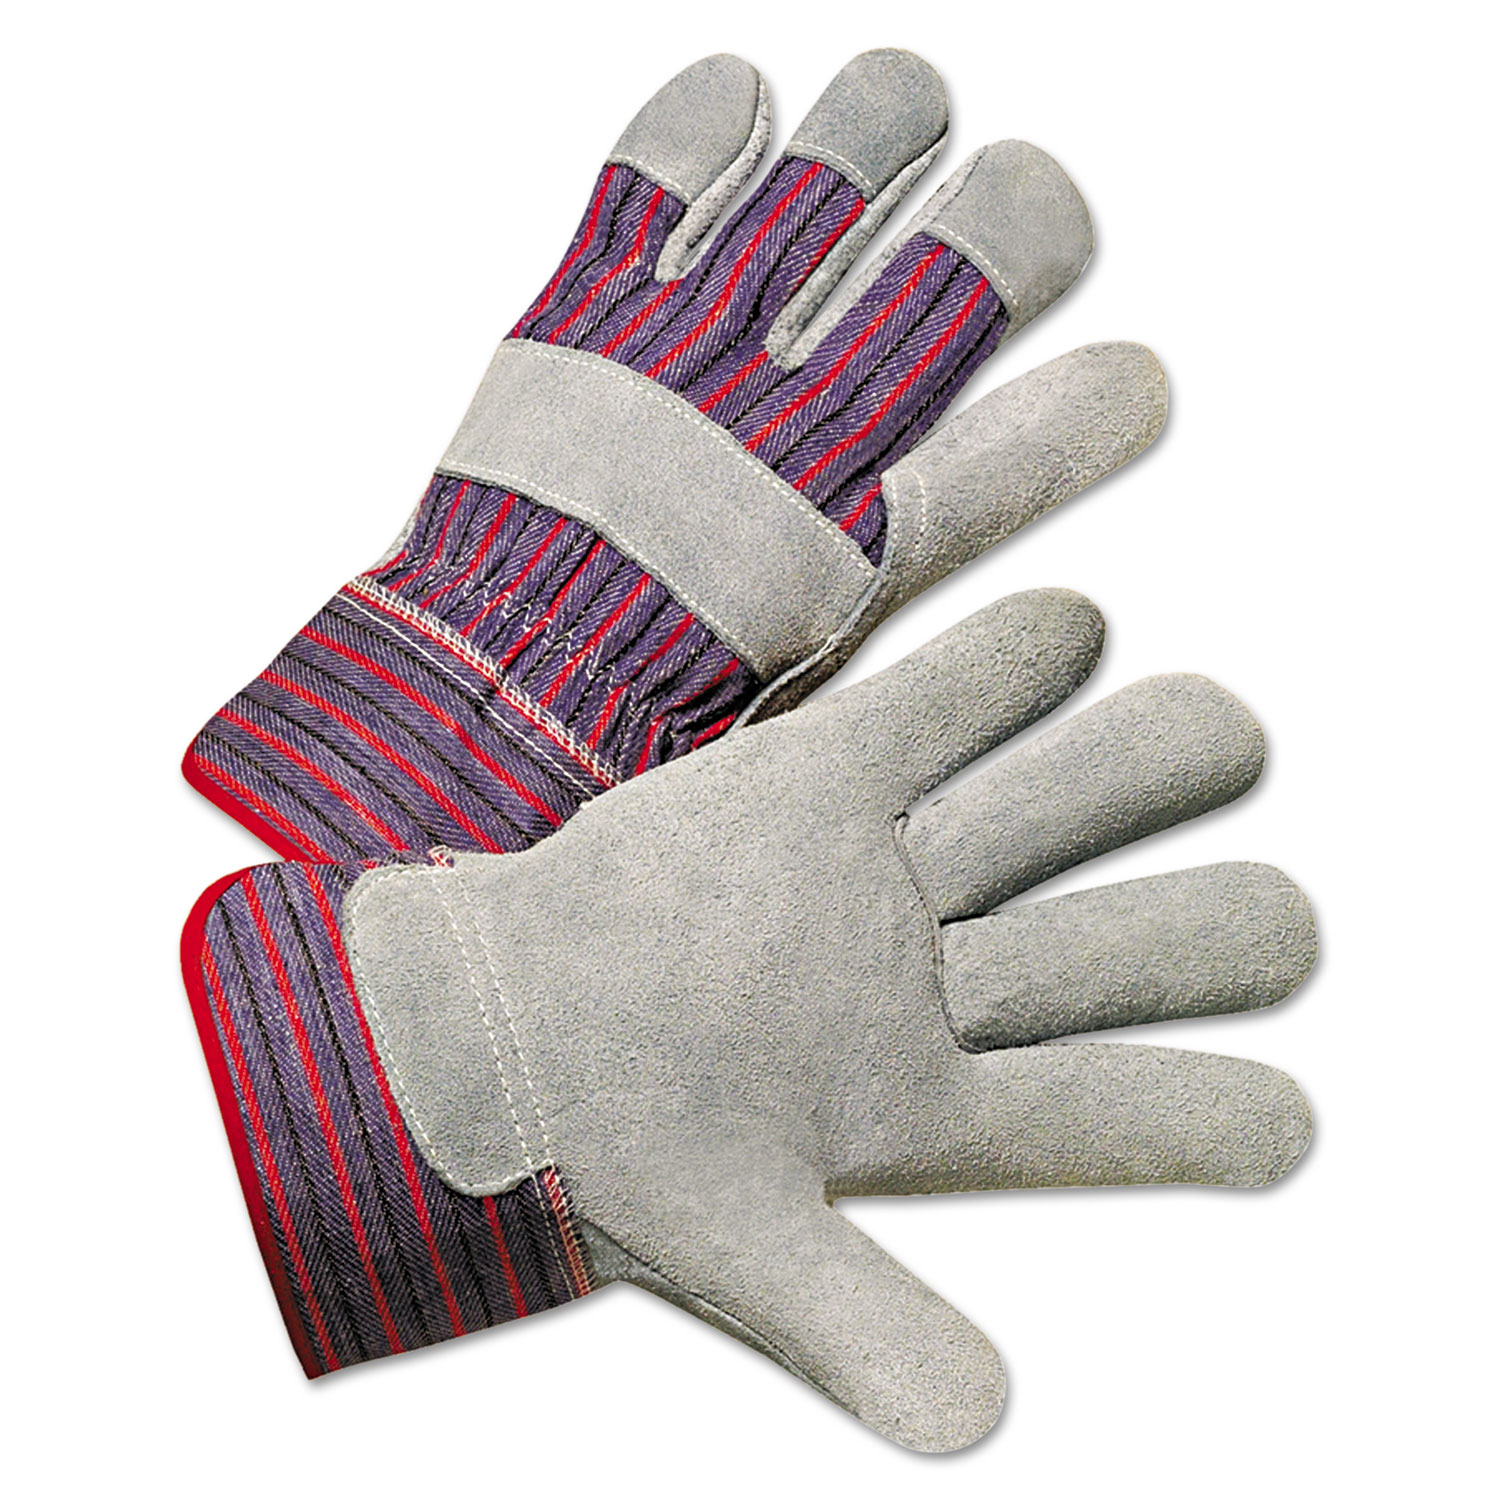  Anchor Brand 500SC Leather Palm Work Gloves, Gray/Blue/White, Large, 12 Pairs (ANR2000) 